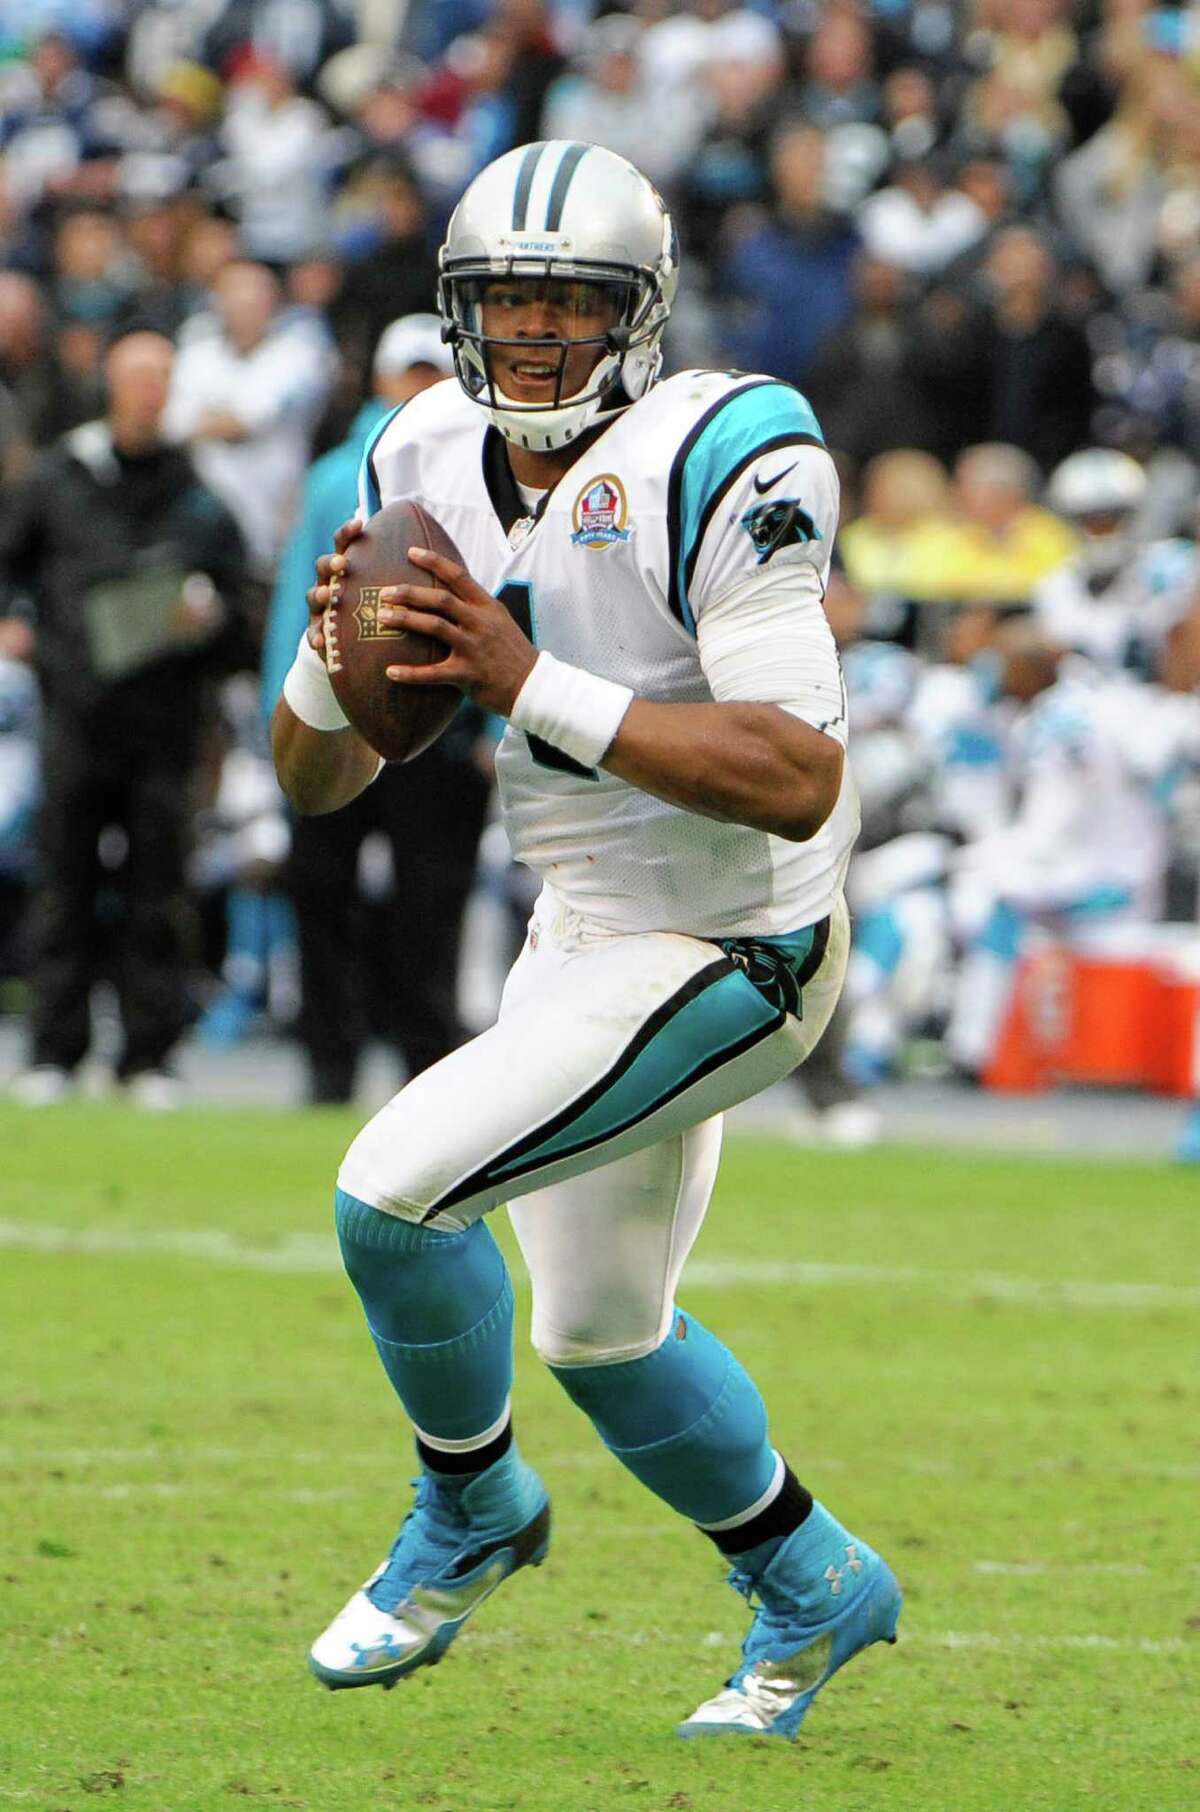 Carolina Panthers quarterback Cam Newton (1) throws during first half of an NFL football game against the San Diego Chargers Sunday, Dec. 16, 2012, in San Diego. (AP Photo/Denis Poroy)